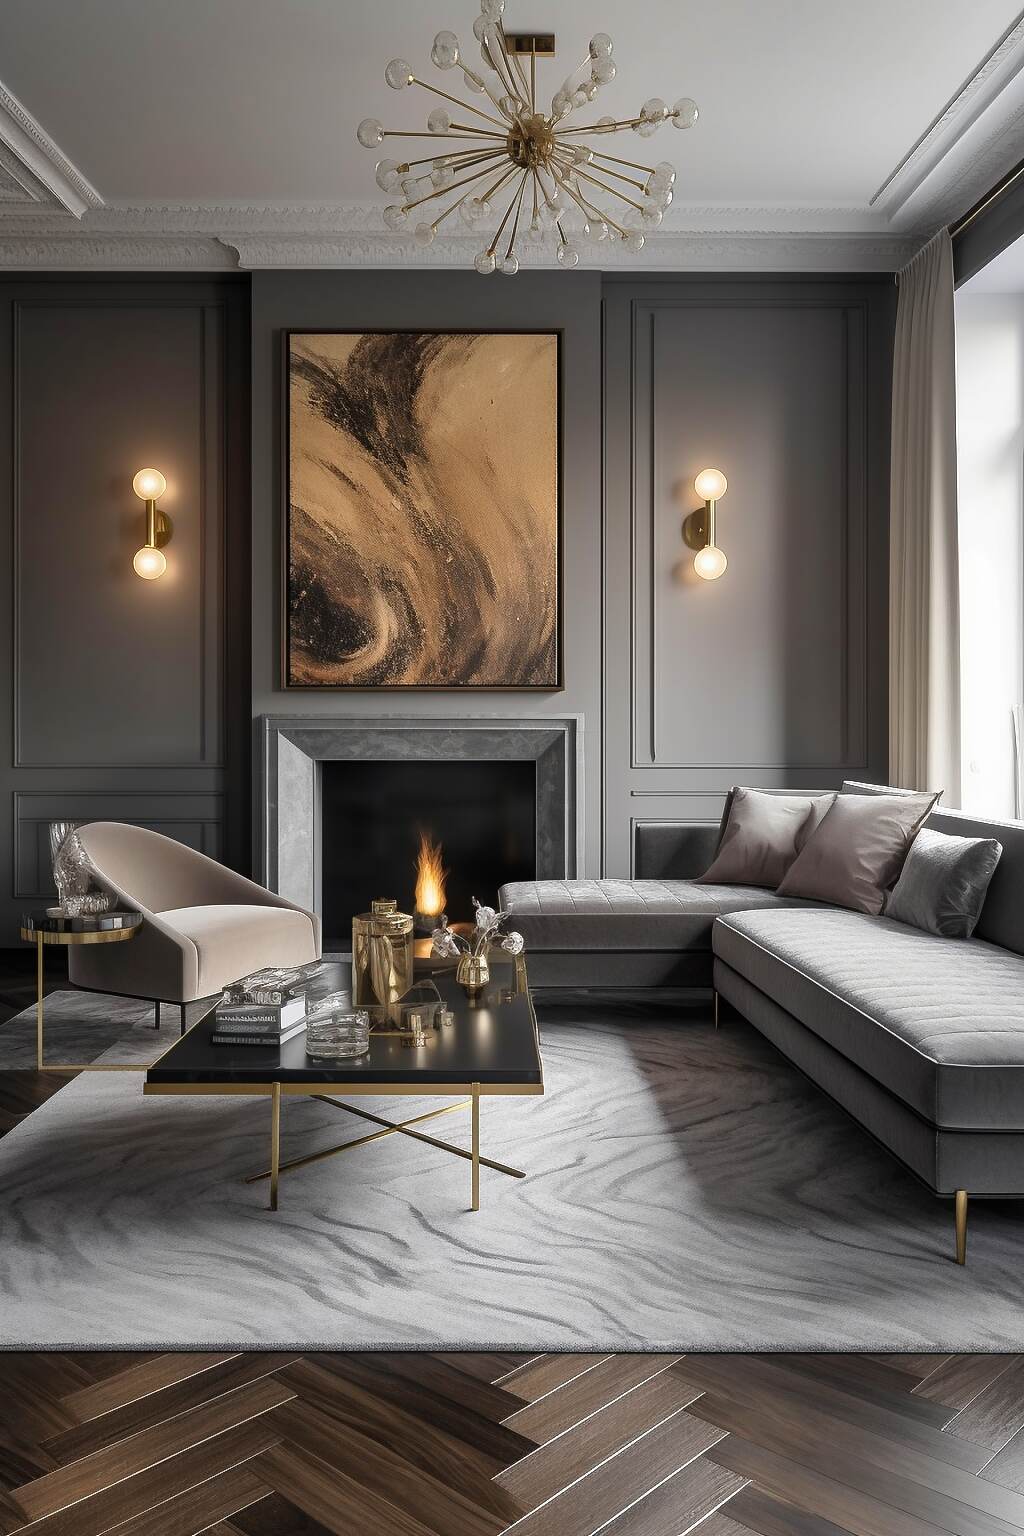 Grays And Golds Unite In This Stunning Living Room